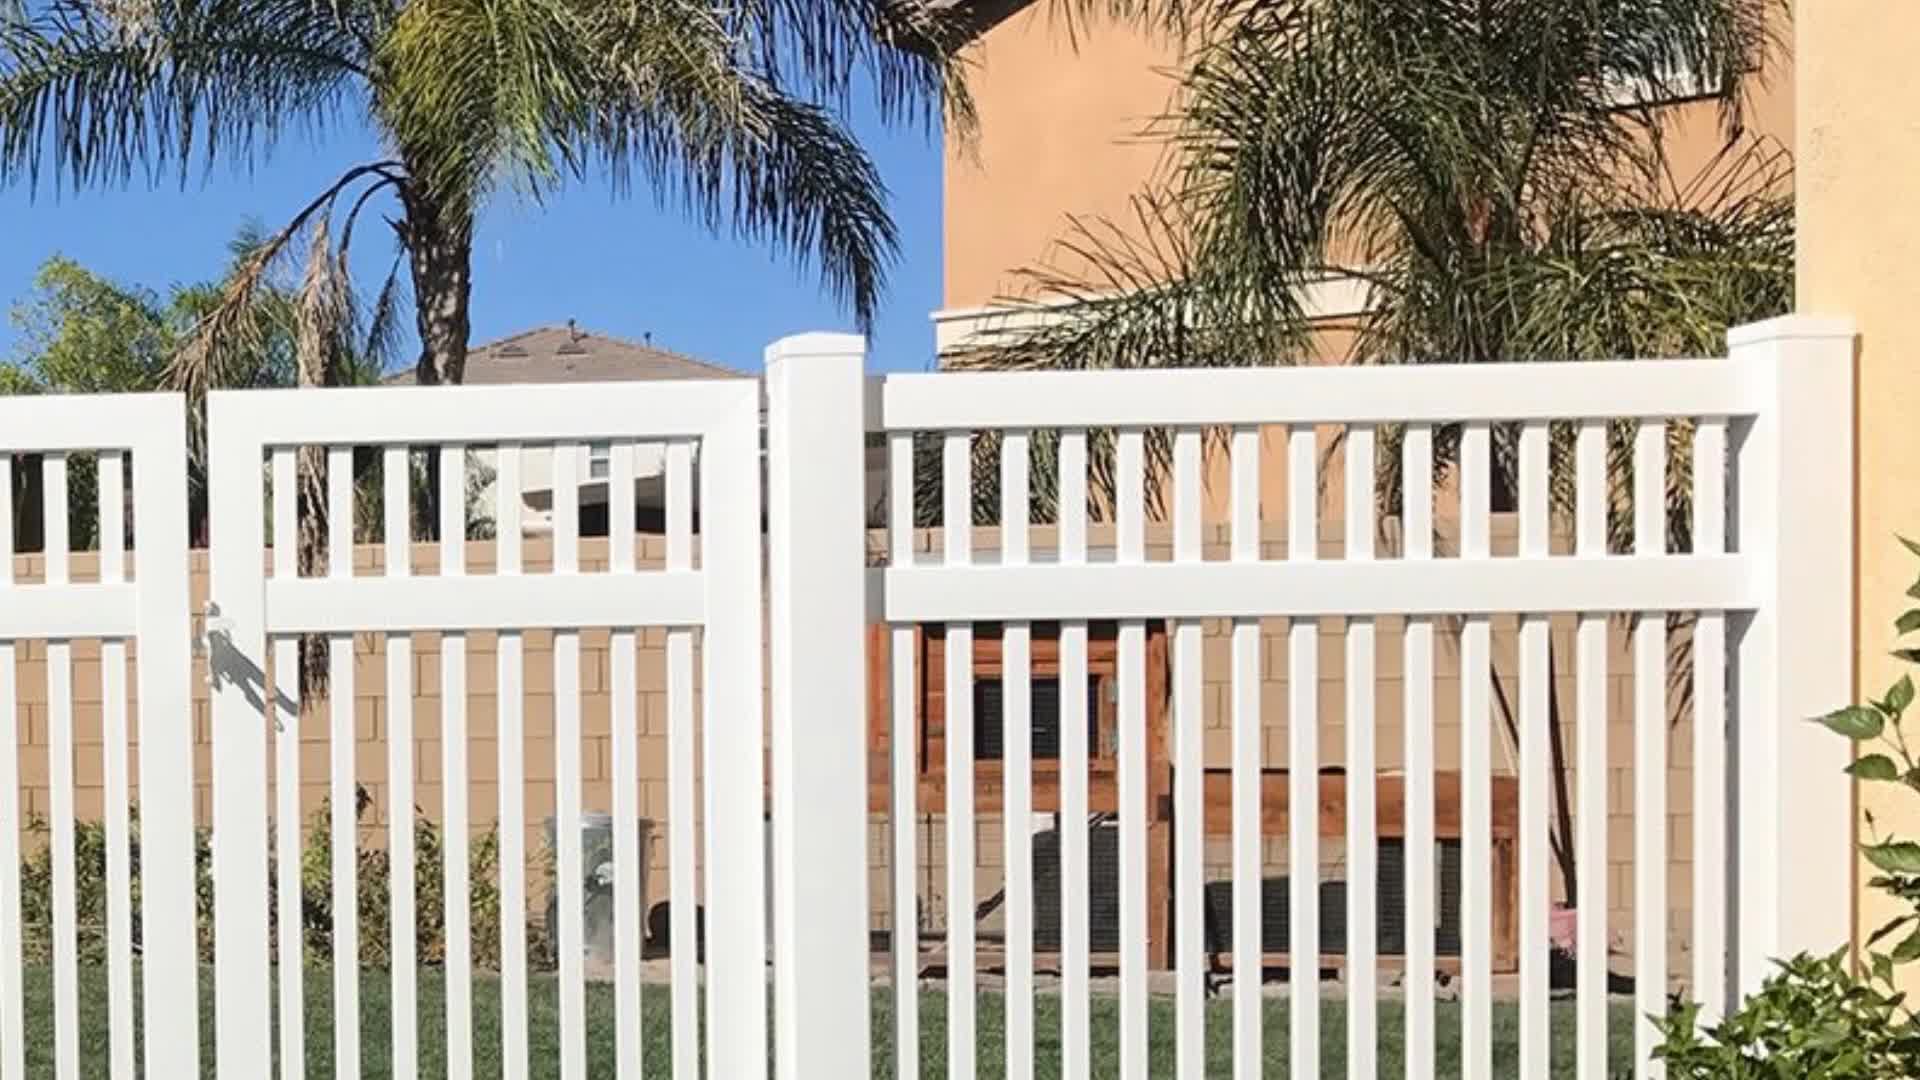 Cost Effective Low Price Composite Picket Fence